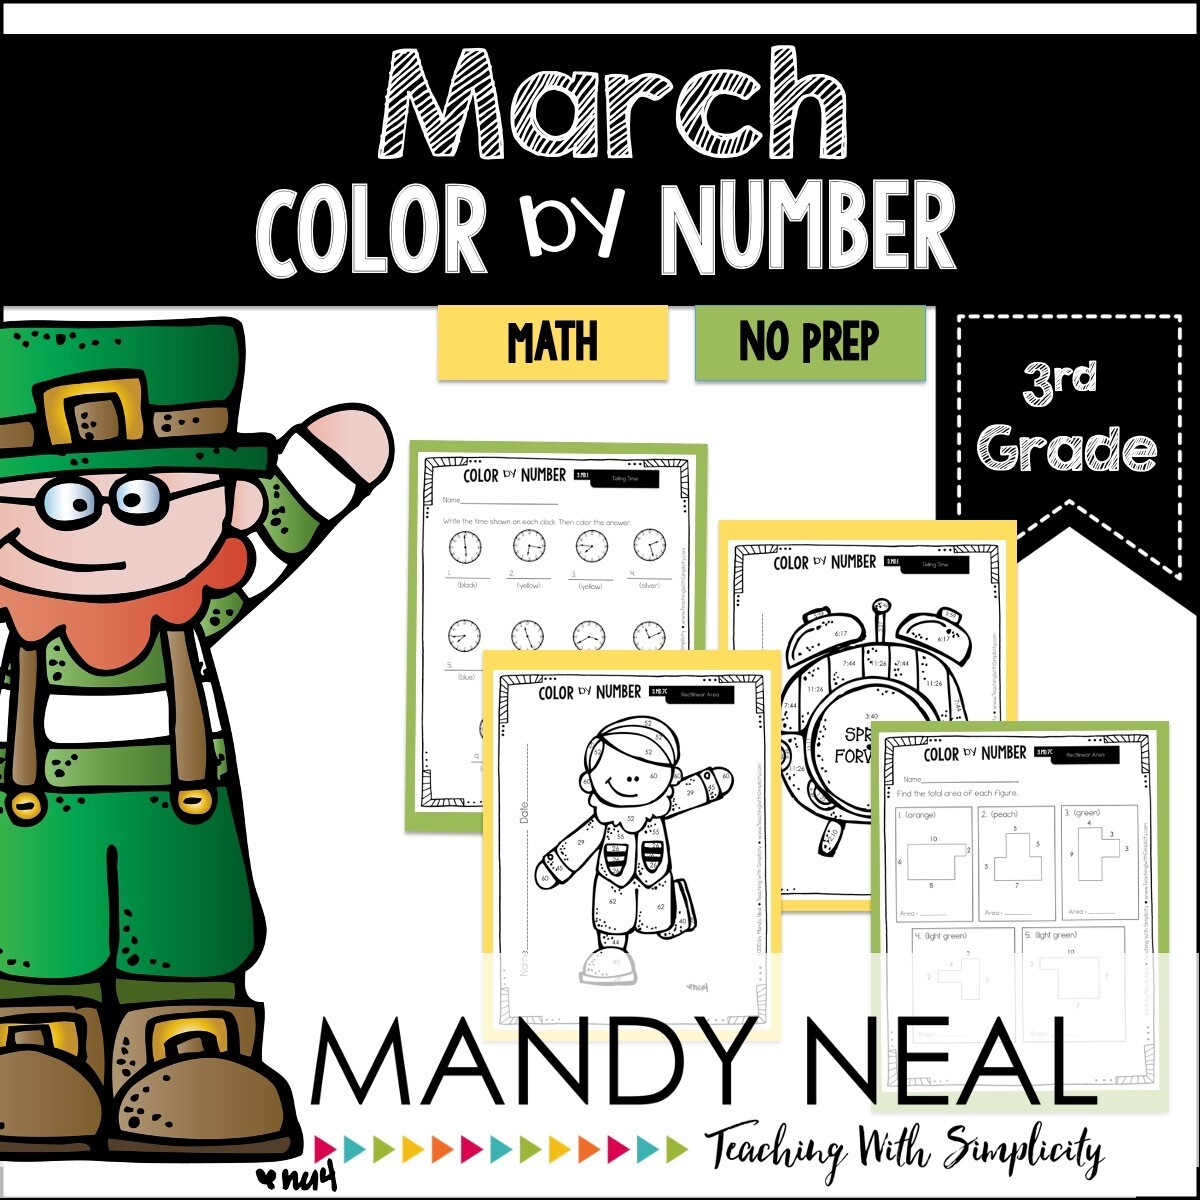 March Color By Number for 3rd Grade Math